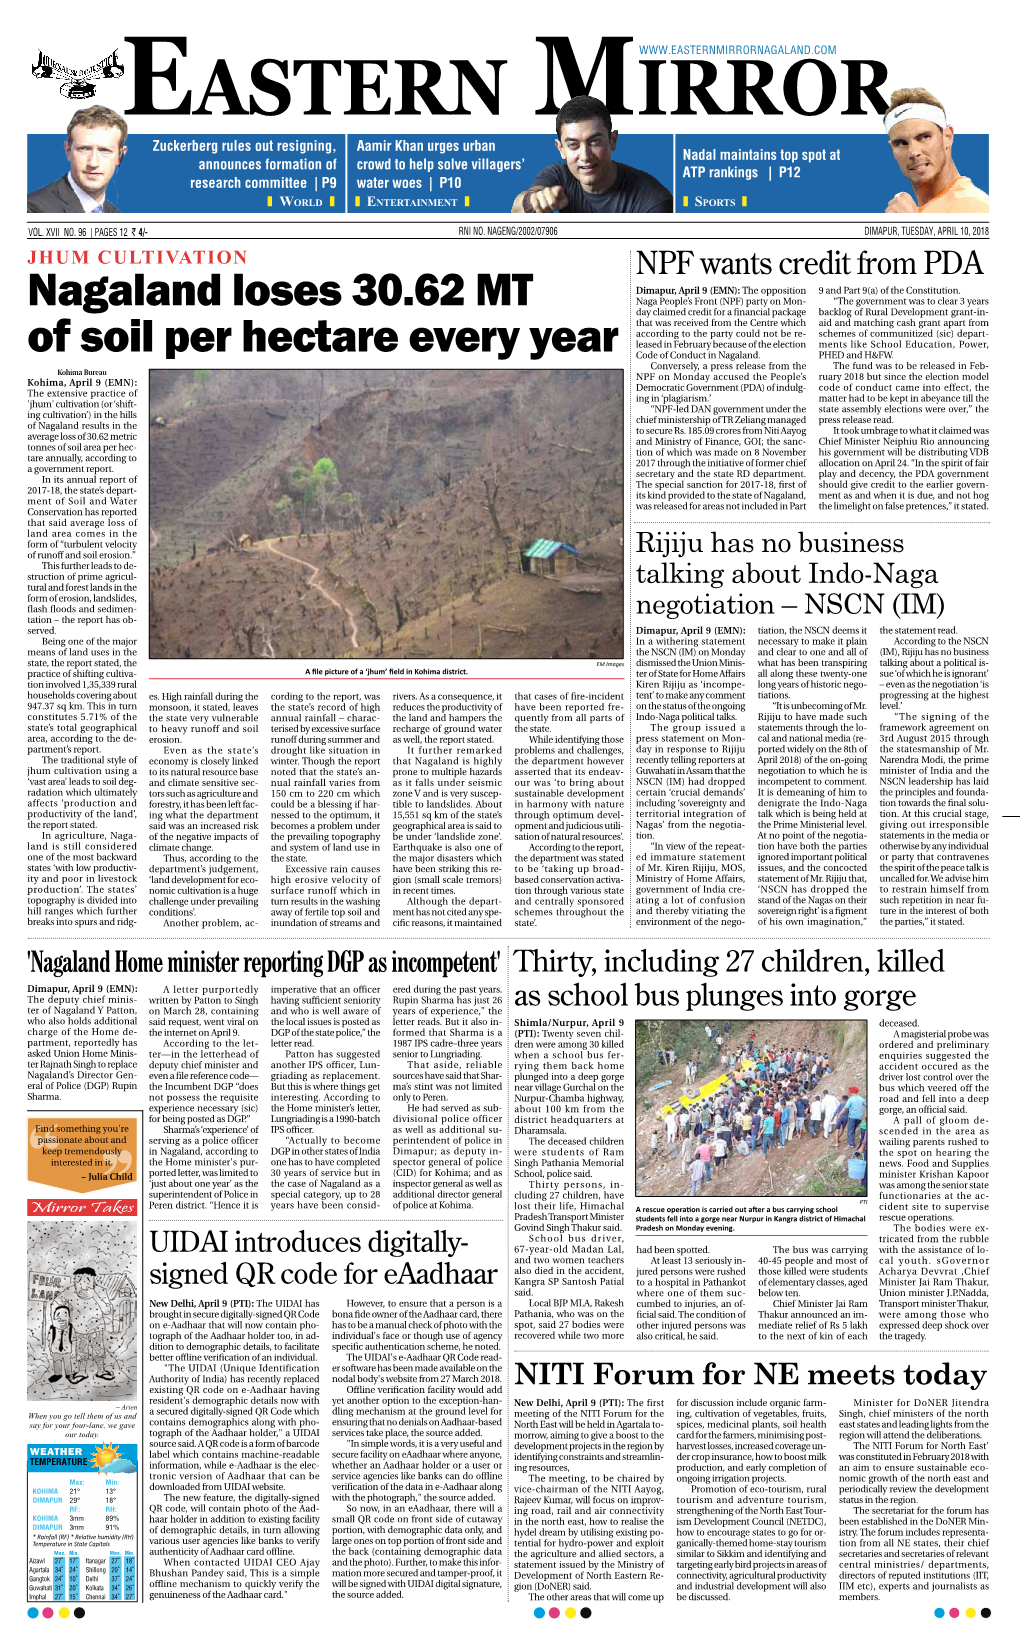 Nagaland Loses 30.62 MT of Soil Per Hectare Every